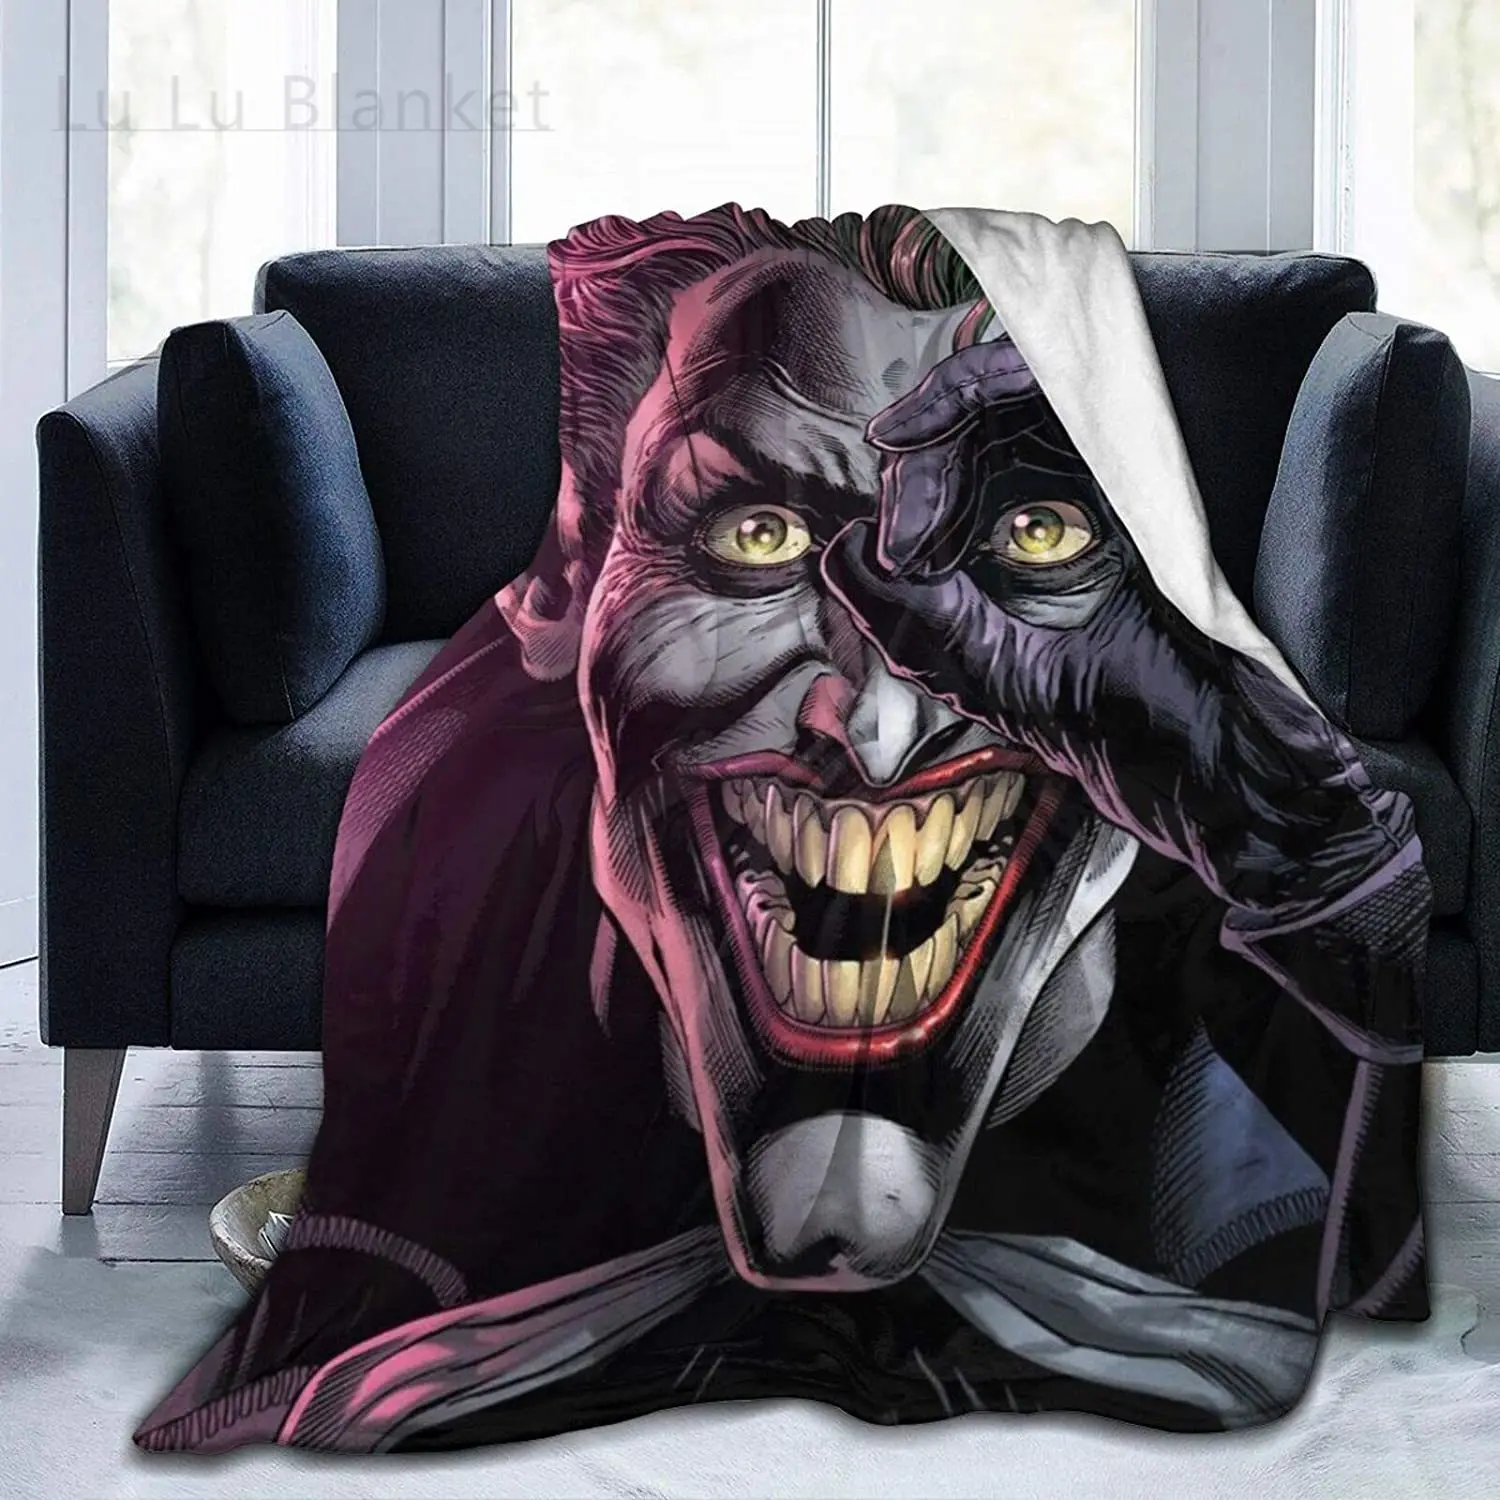 

Joker Ultra-Soft Micro Fleece Blanket All Season Soft and Warm Flannel Blanket for Couch Sofa Bed Living Room Cozy Luxury